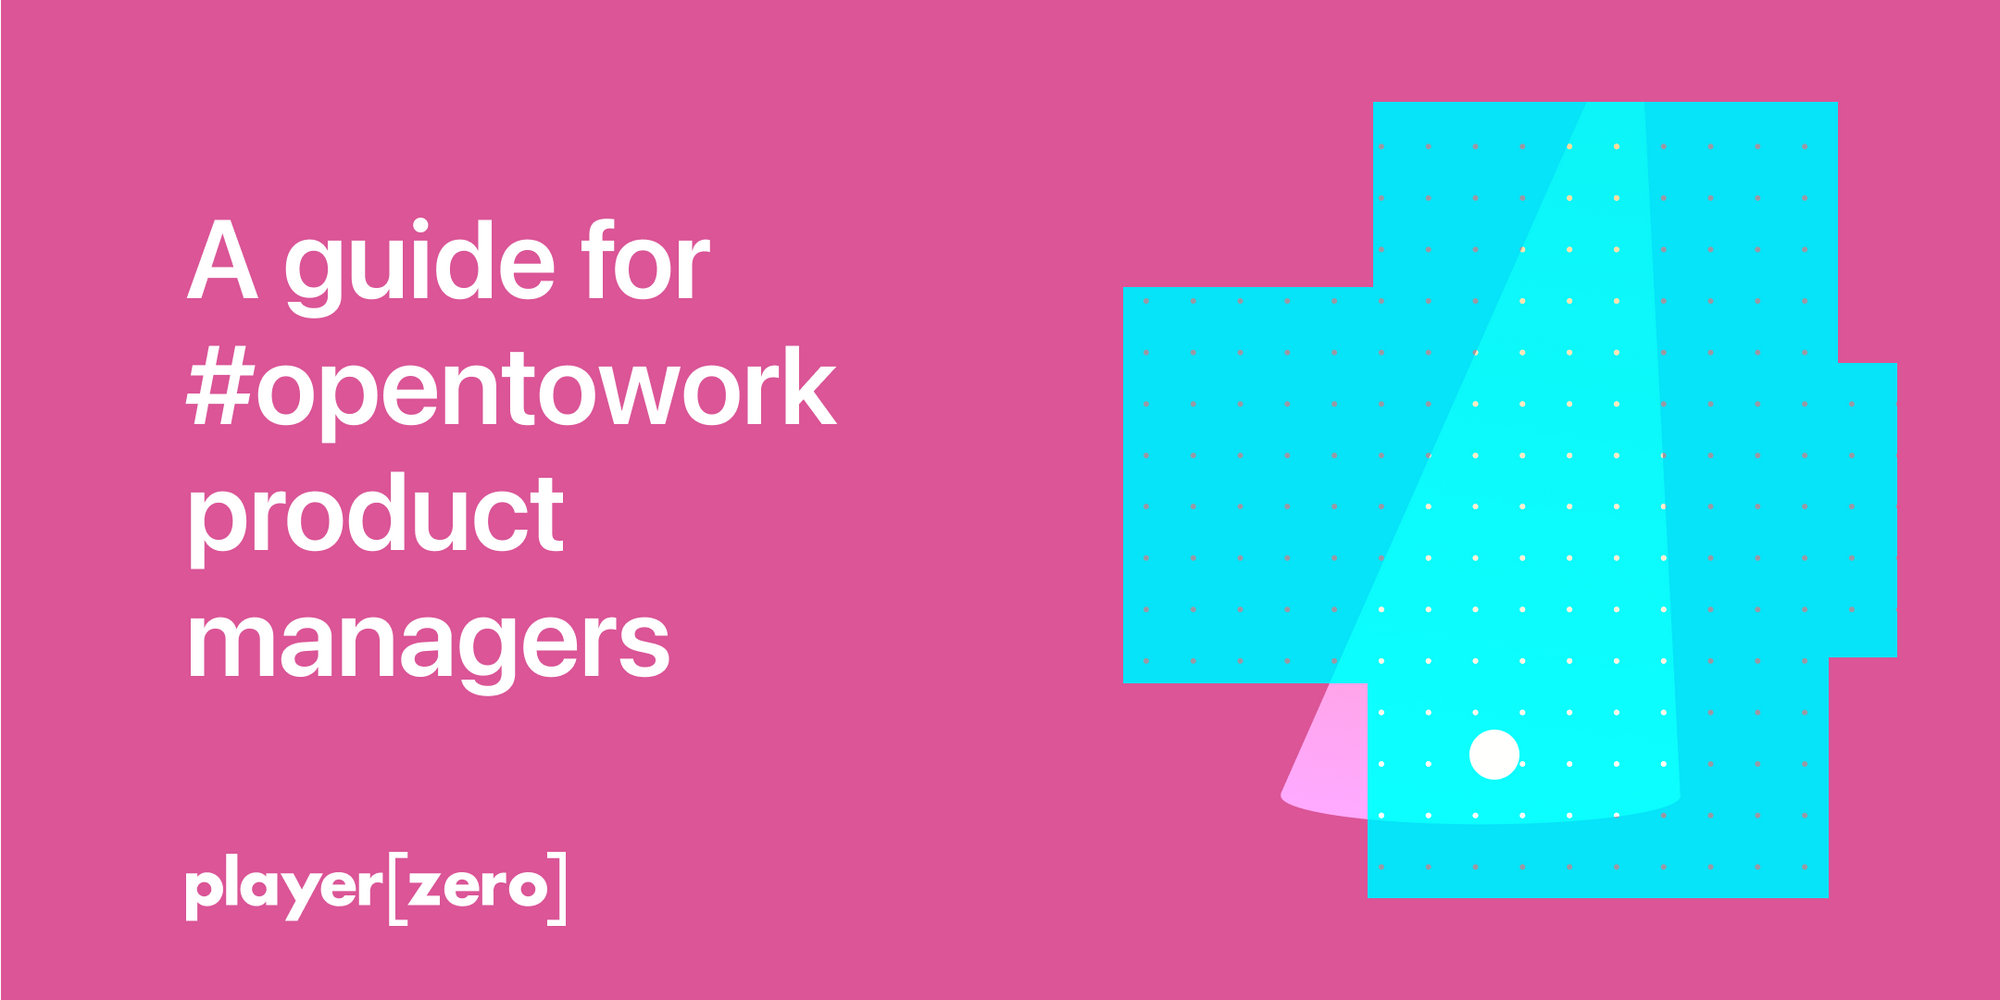 Cover Image for A guide for #opentowork product managers